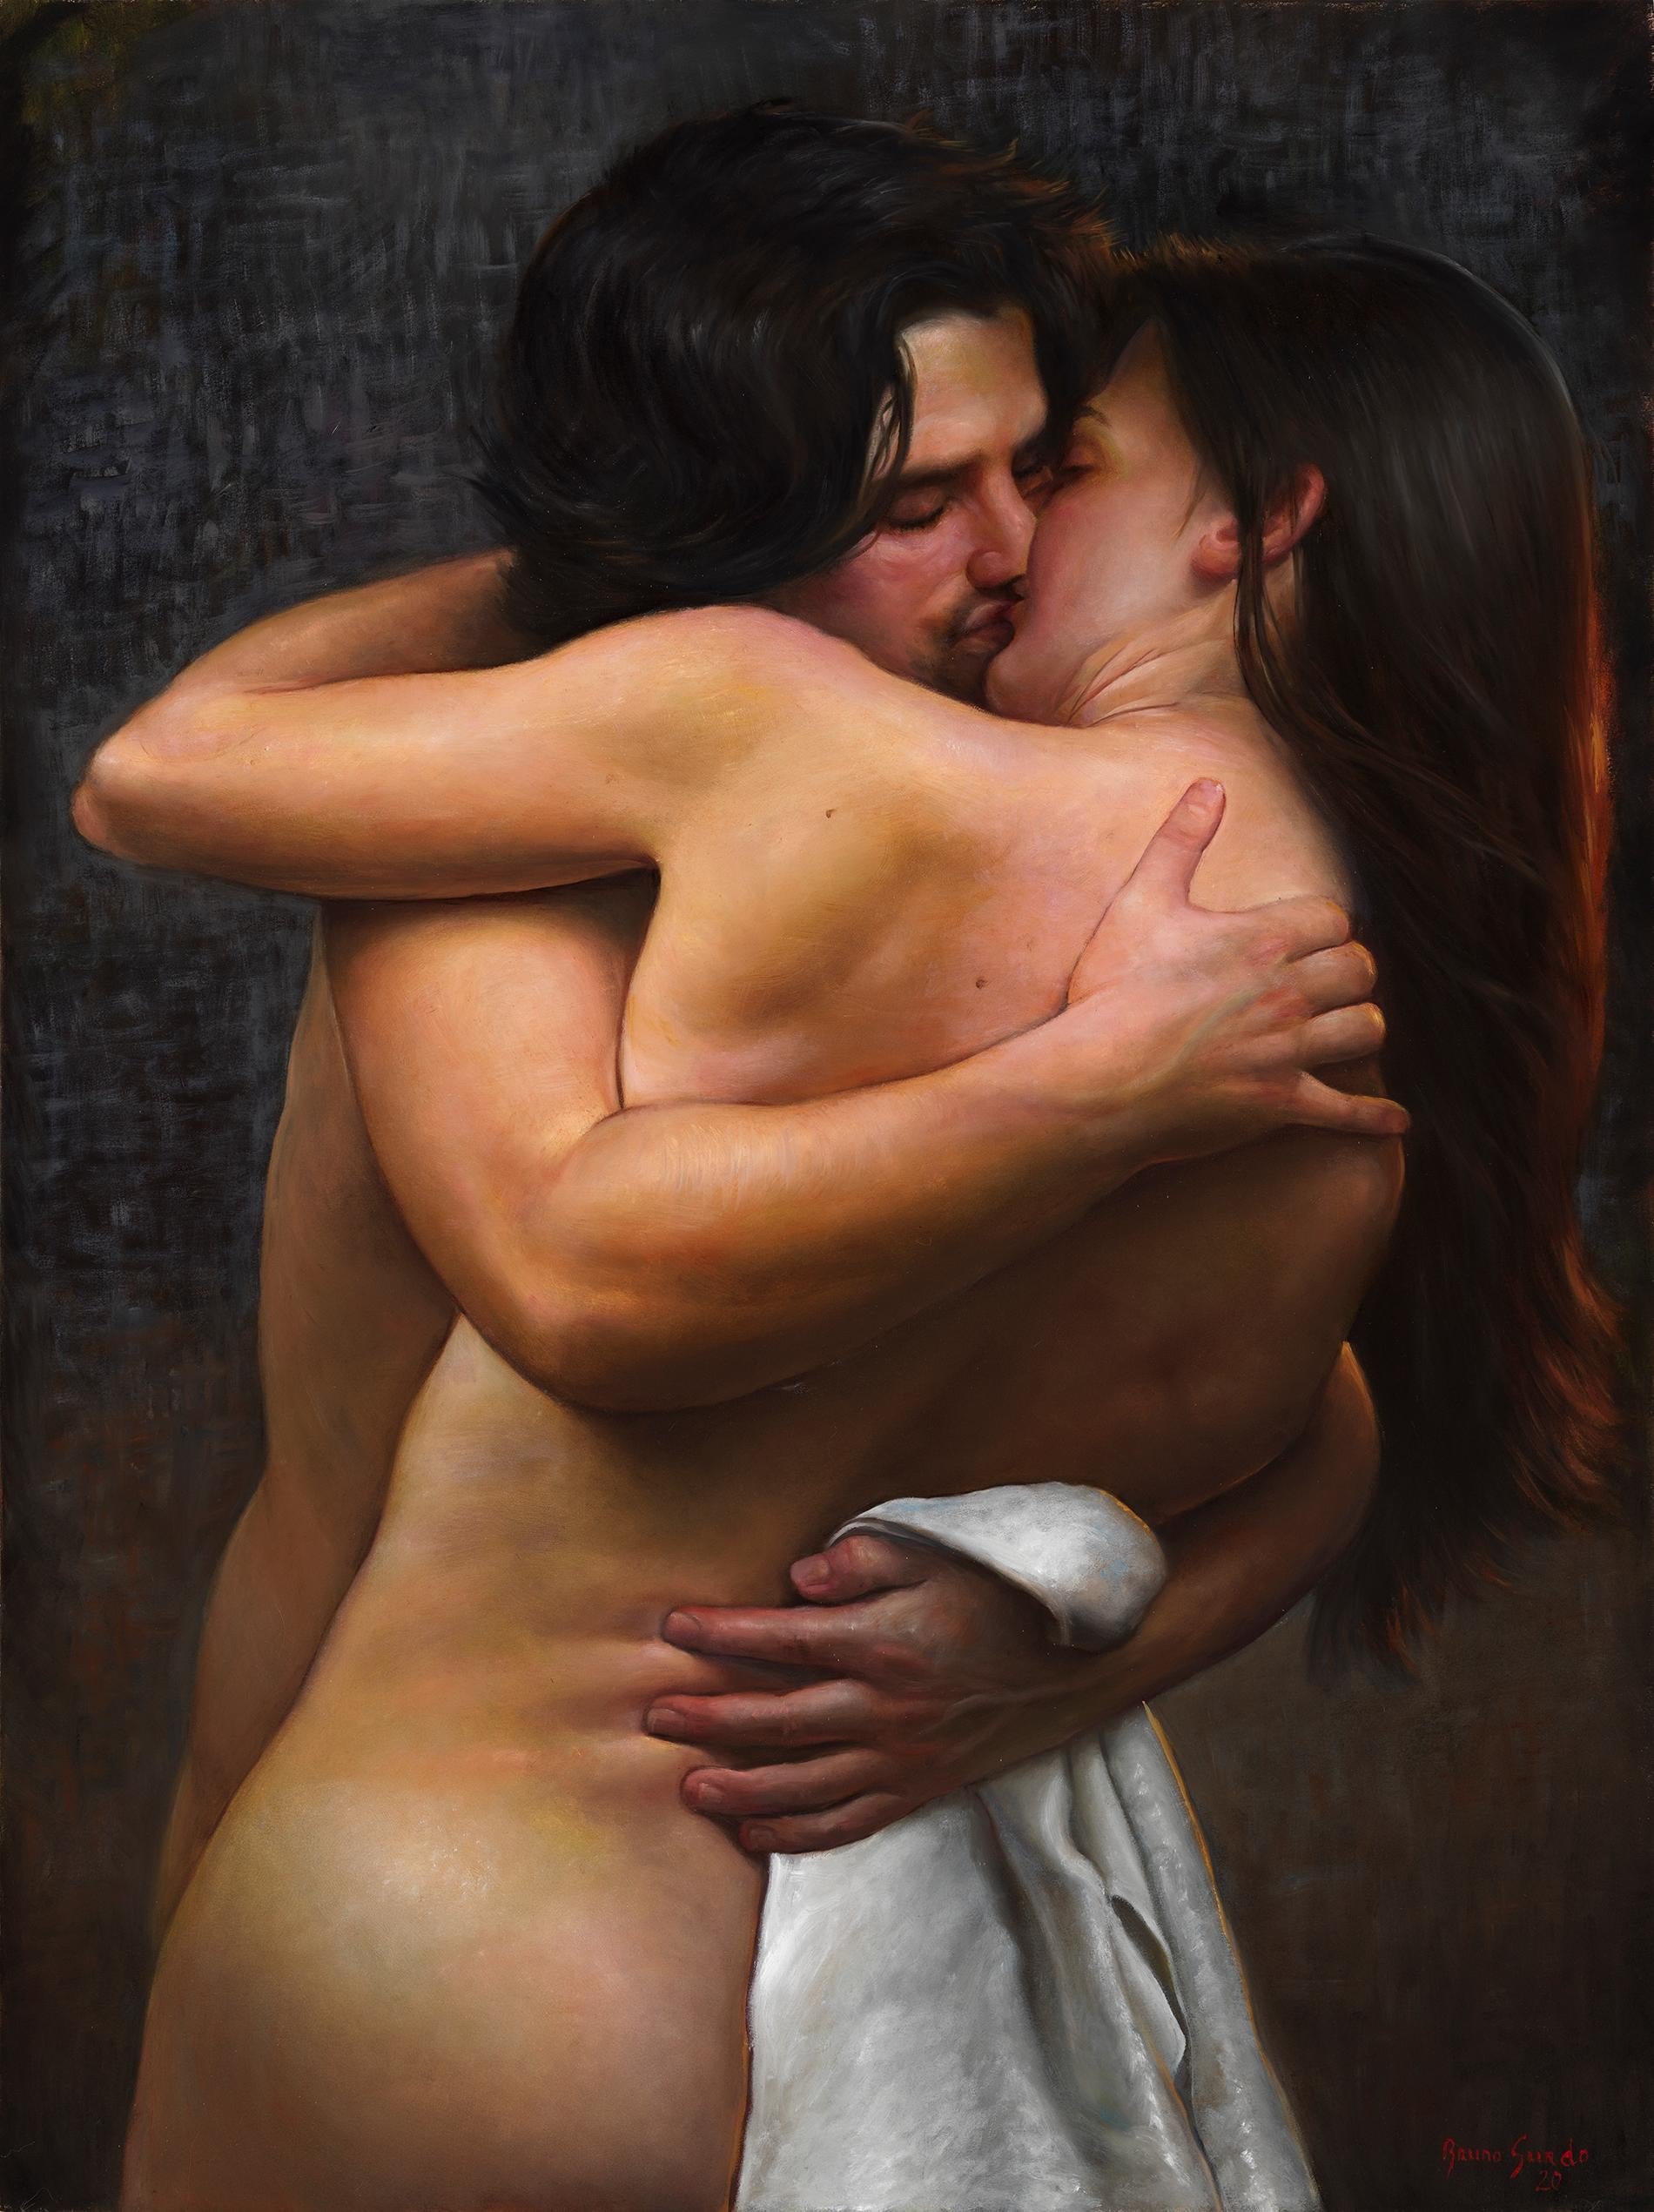 Desire - Nude Lovers Entangled in a Passionate Kiss, Oil on Paper on Canvas